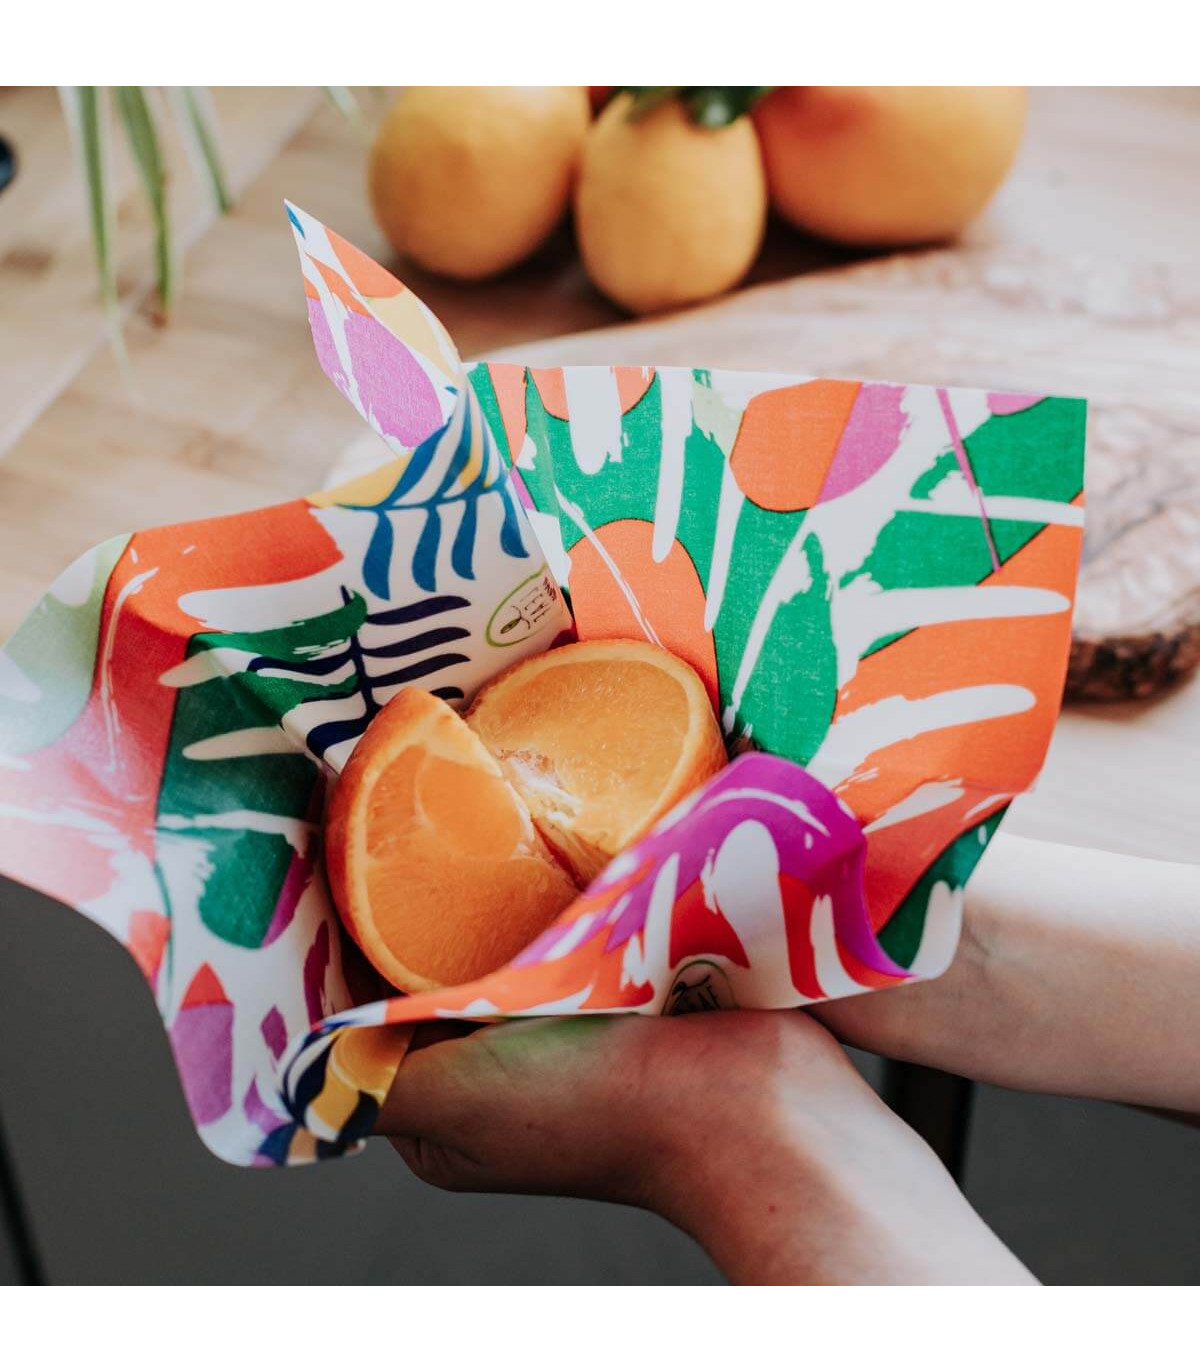 What are Beeswax Wraps Used for? - BeeBee Wraps – BeeBee & Leaf